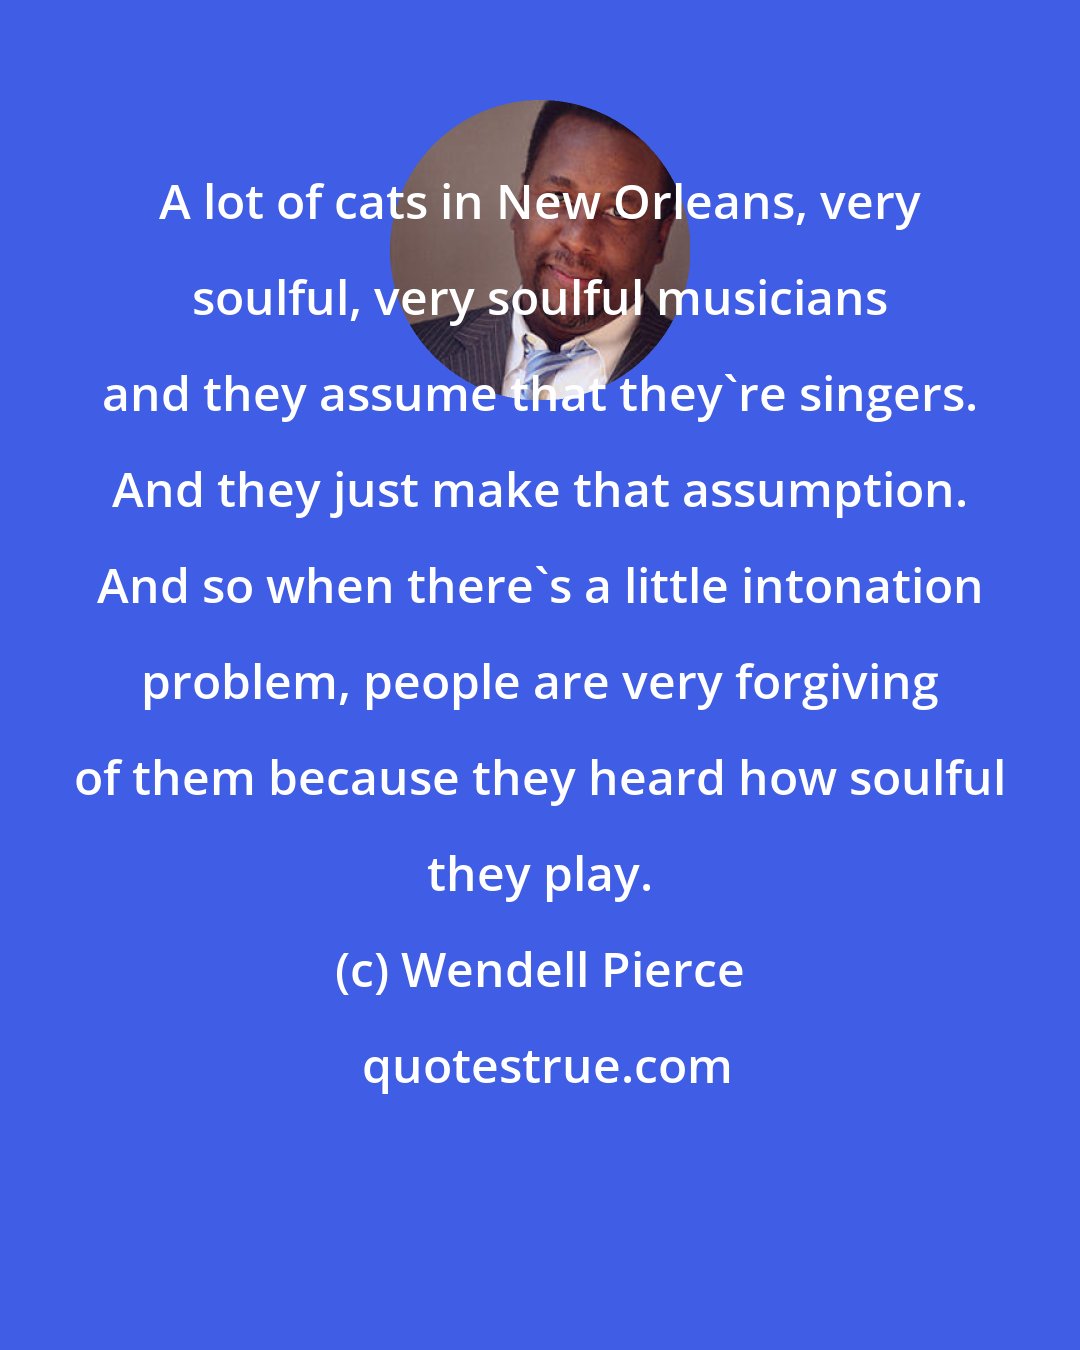 Wendell Pierce: A lot of cats in New Orleans, very soulful, very soulful musicians and they assume that they're singers. And they just make that assumption. And so when there's a little intonation problem, people are very forgiving of them because they heard how soulful they play.